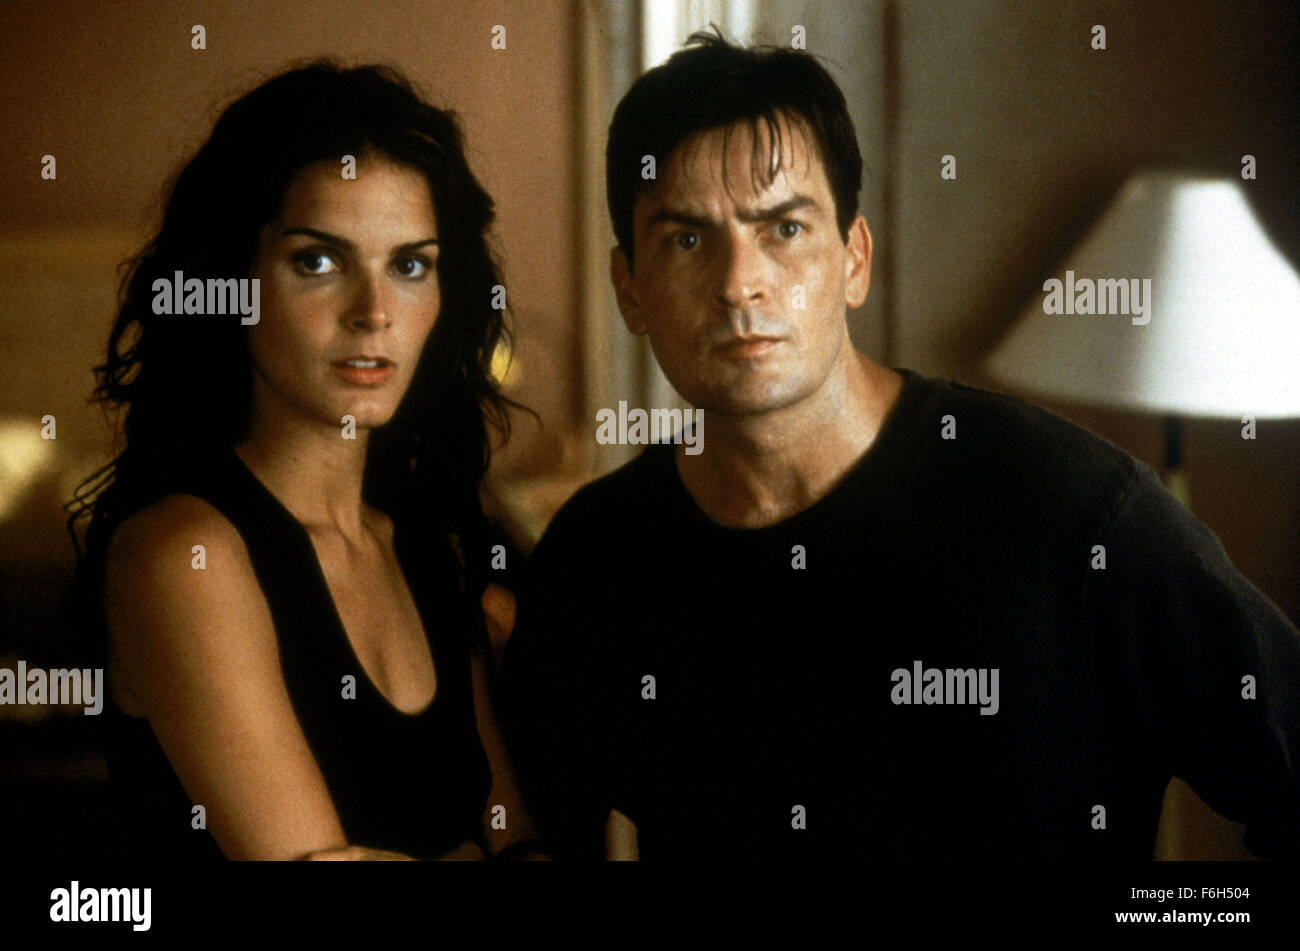 RELEASE DATE: Nov. 15, 2001. MOVIE TITLE: Good Advice. STUDIO: Emmet/Furla Films. PLOT: An investment banker loses everything and must discover what's important in life. PICTURED: CHARLIE SHEEN as Ryan Turner and ANGIE HARMON as Page Hensen. Stock Photo